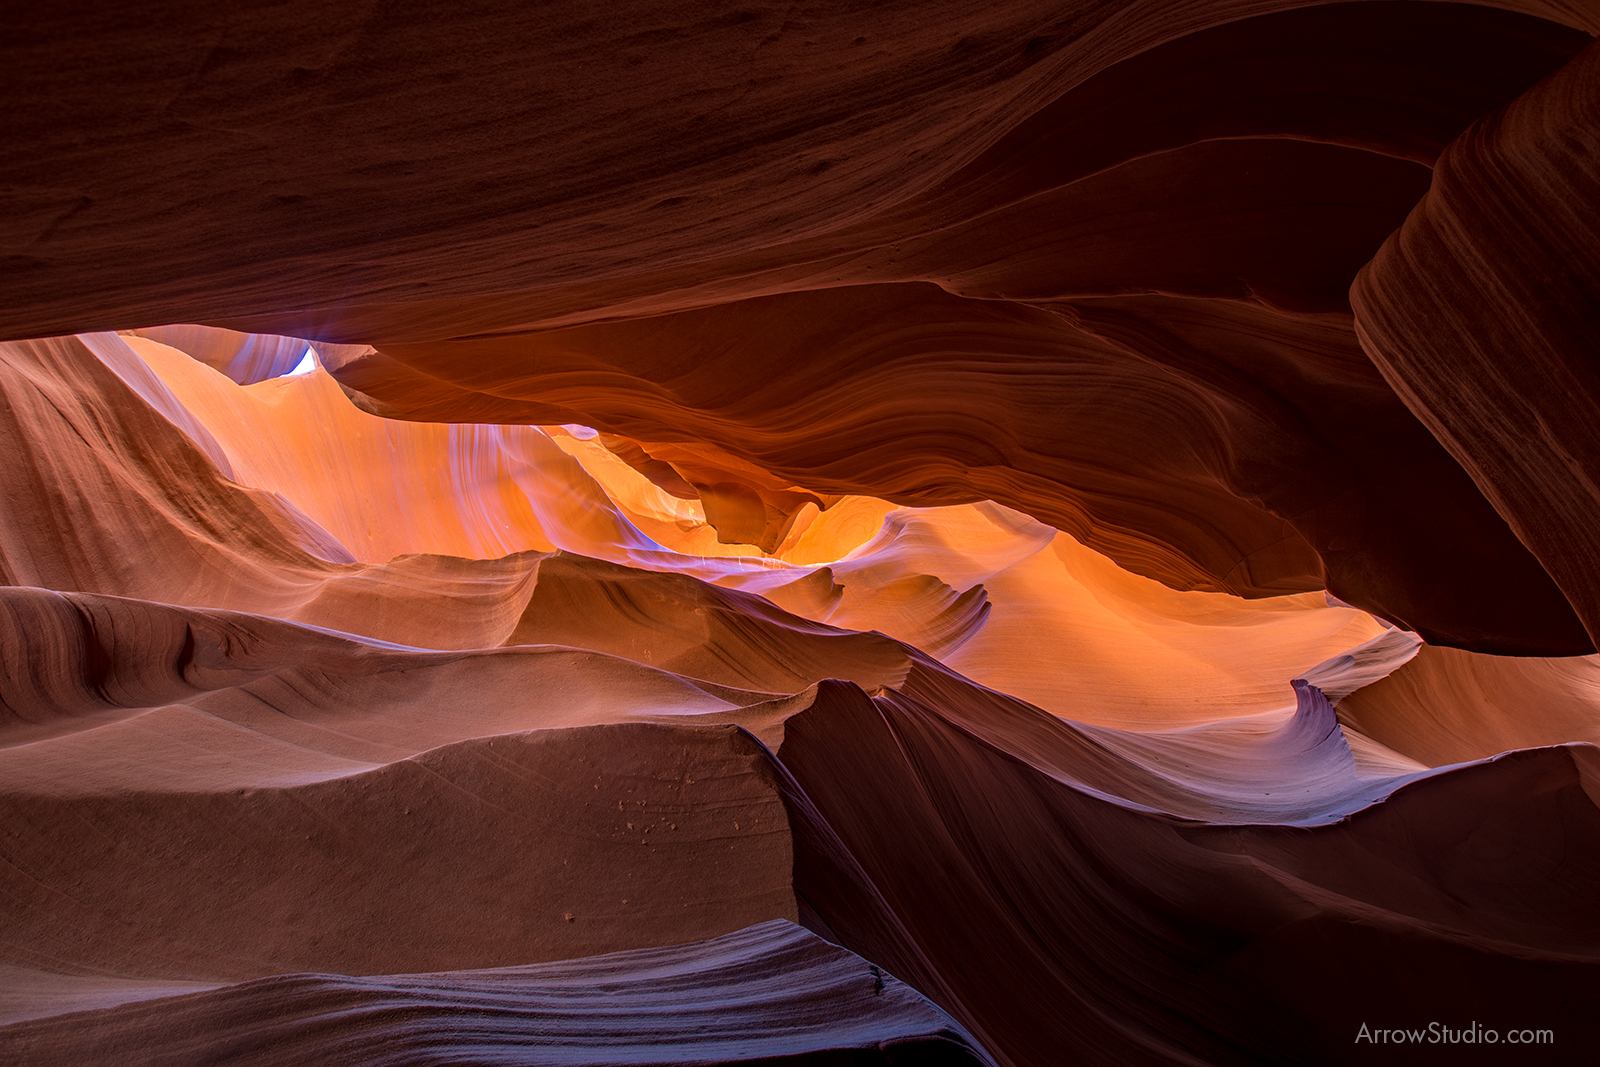 What Its REALLY Like Taking Pictures at Antelope Canyon